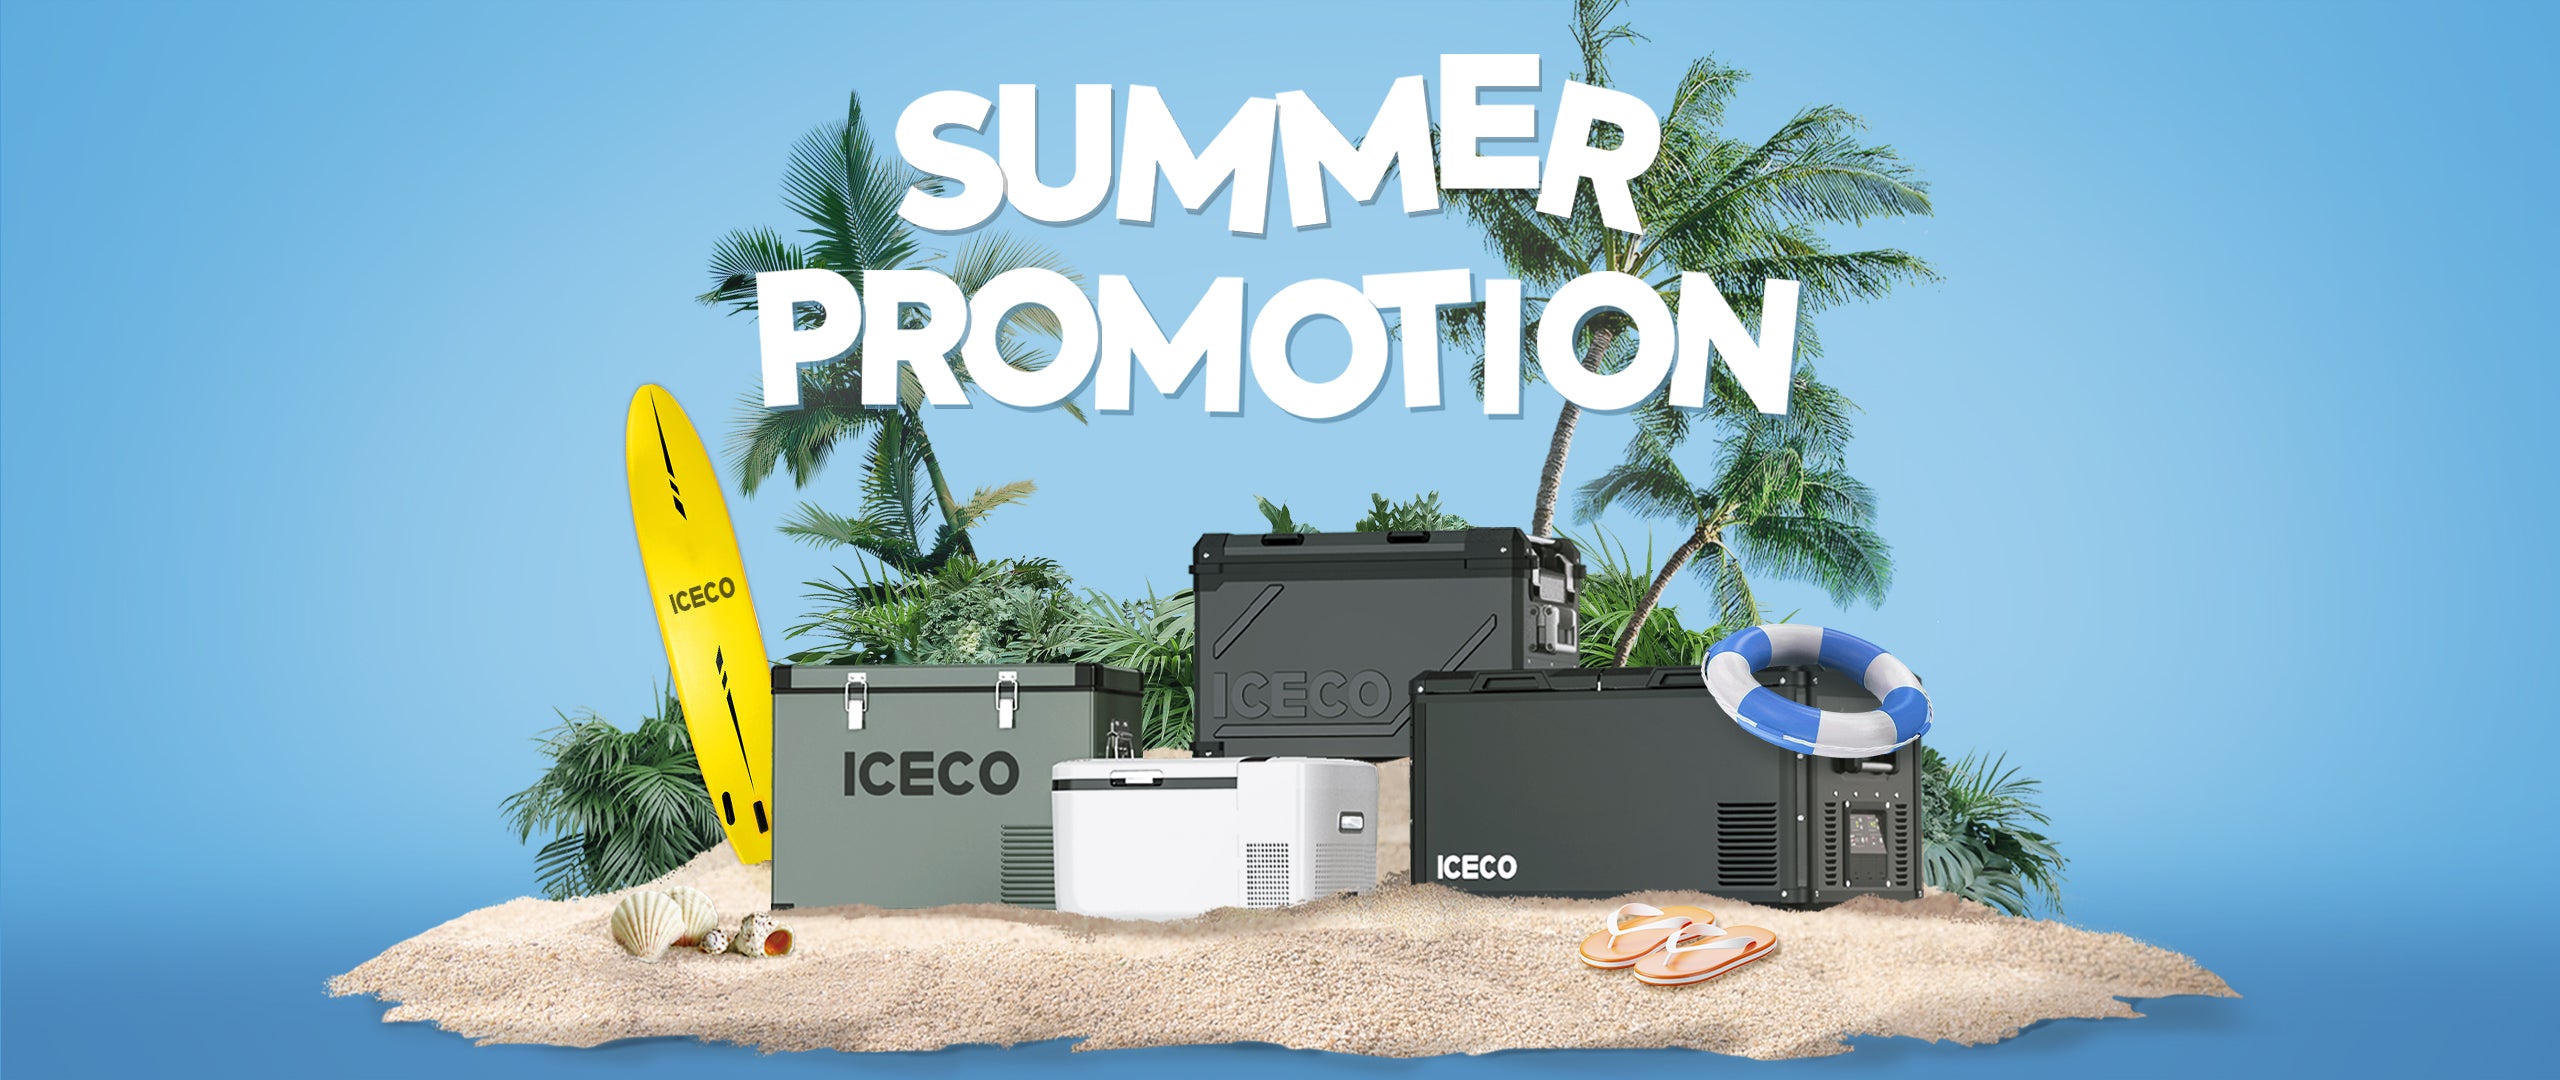 Gear up for Summer Adventures with ICECO: Cool Savings, Hot Deals!